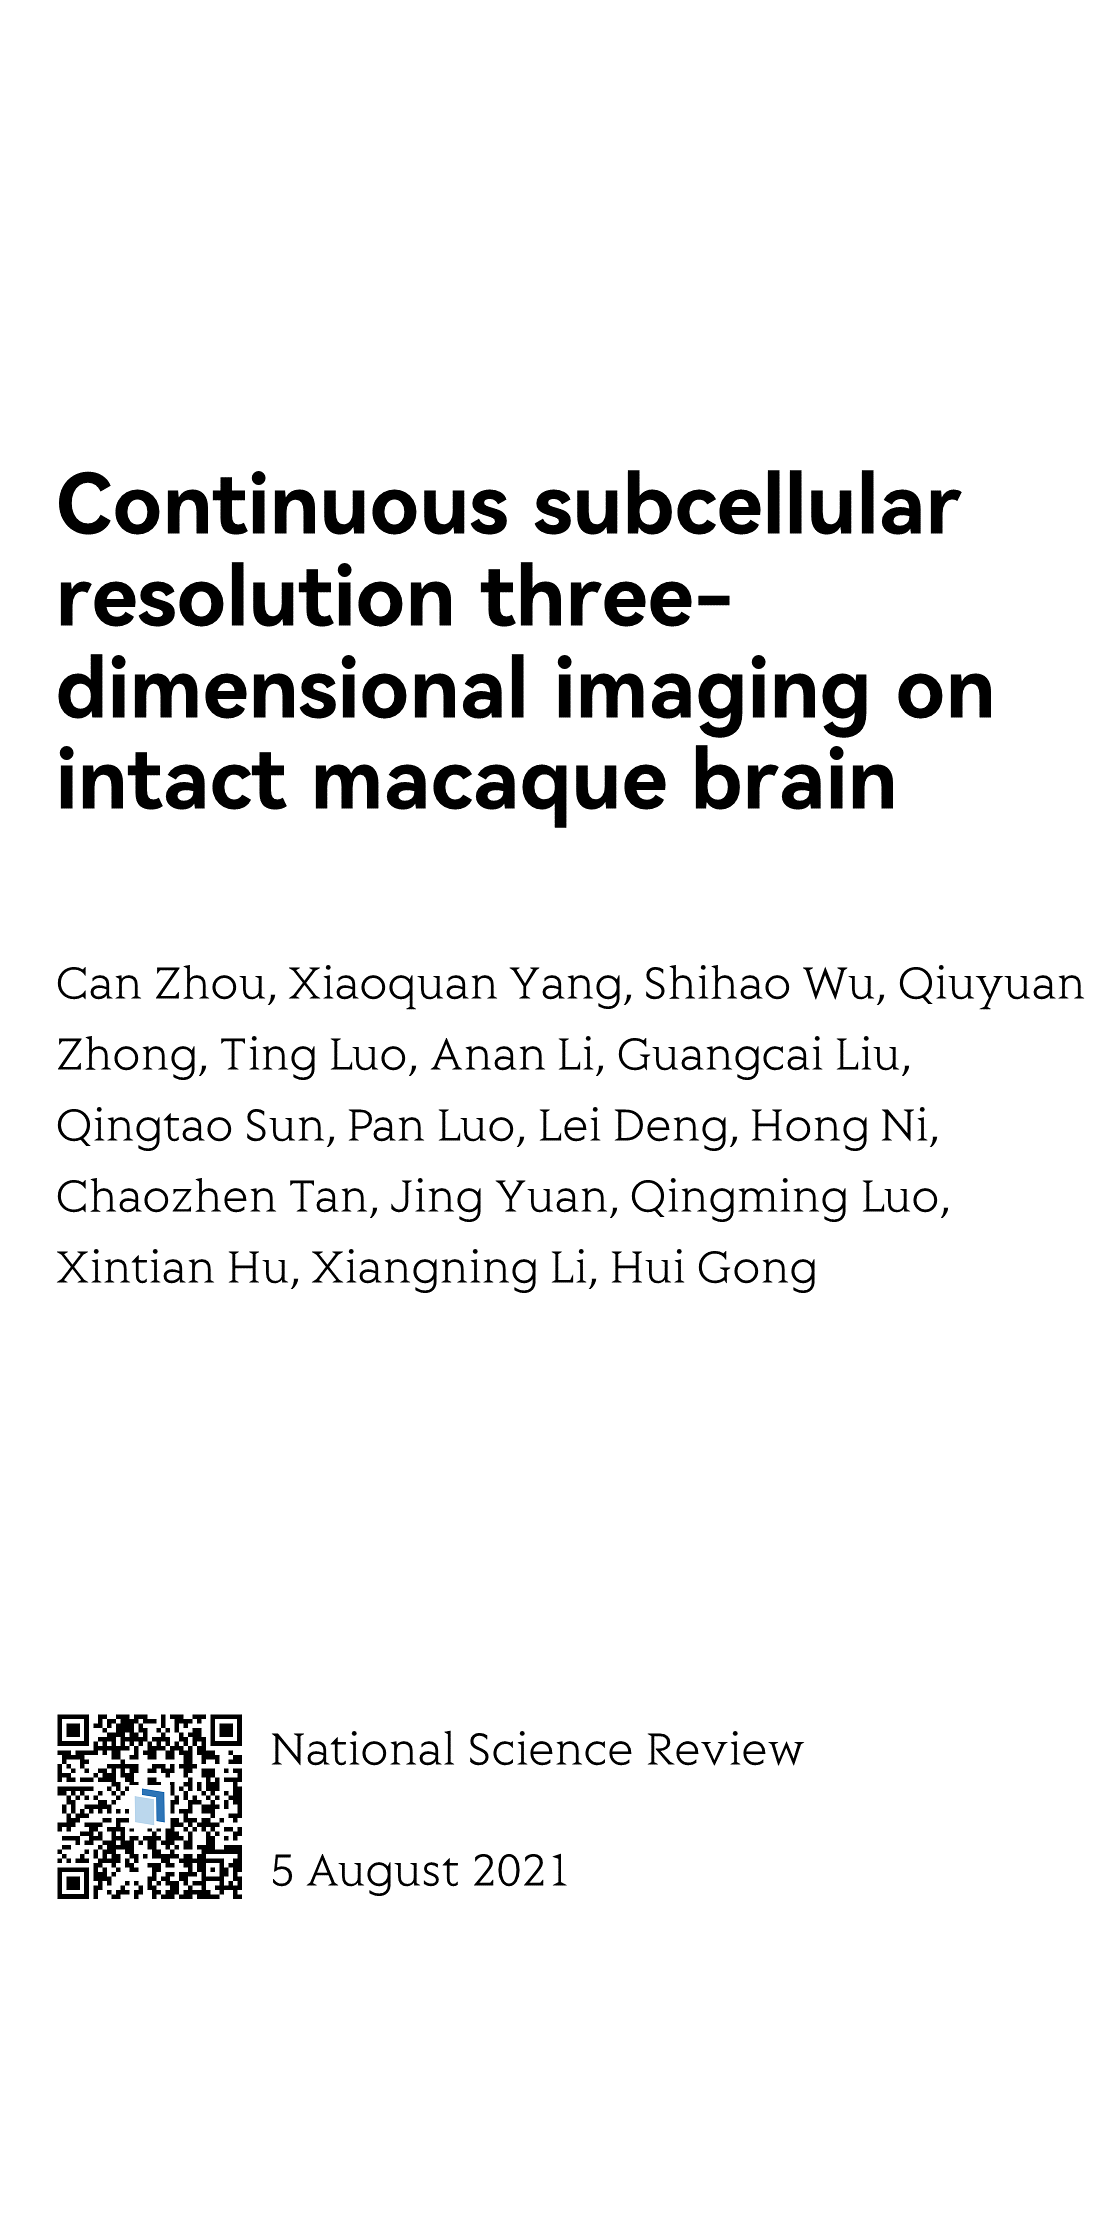 Continuous subcellular resolution three-dimensional imaging on intact macaque brain_1